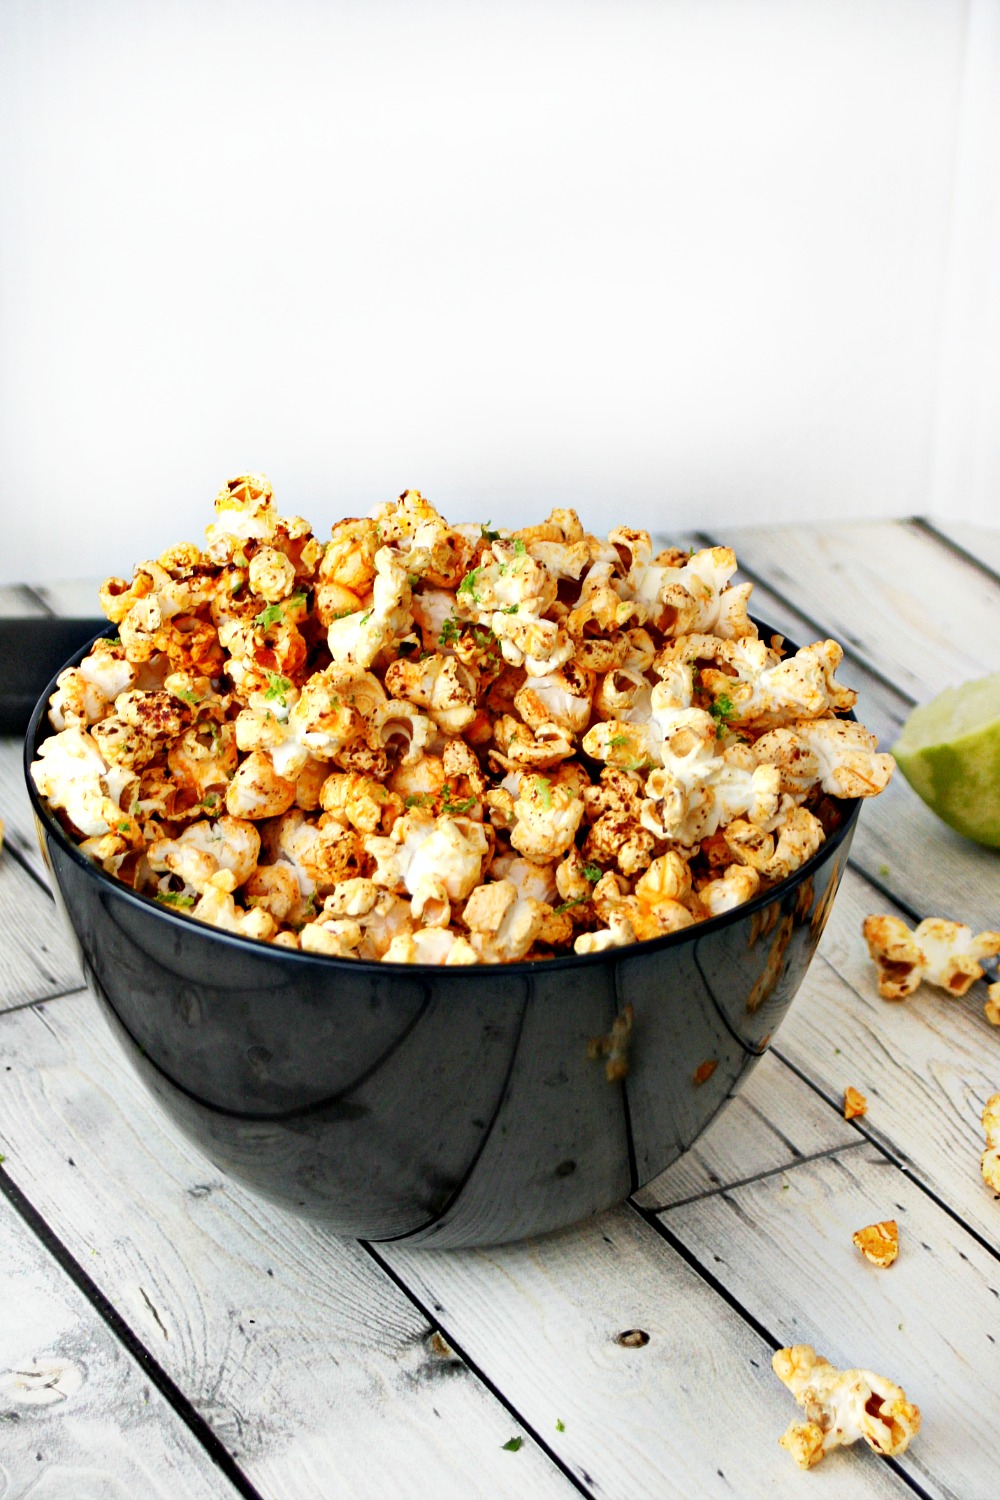 Chili and Lime Popcorn 4